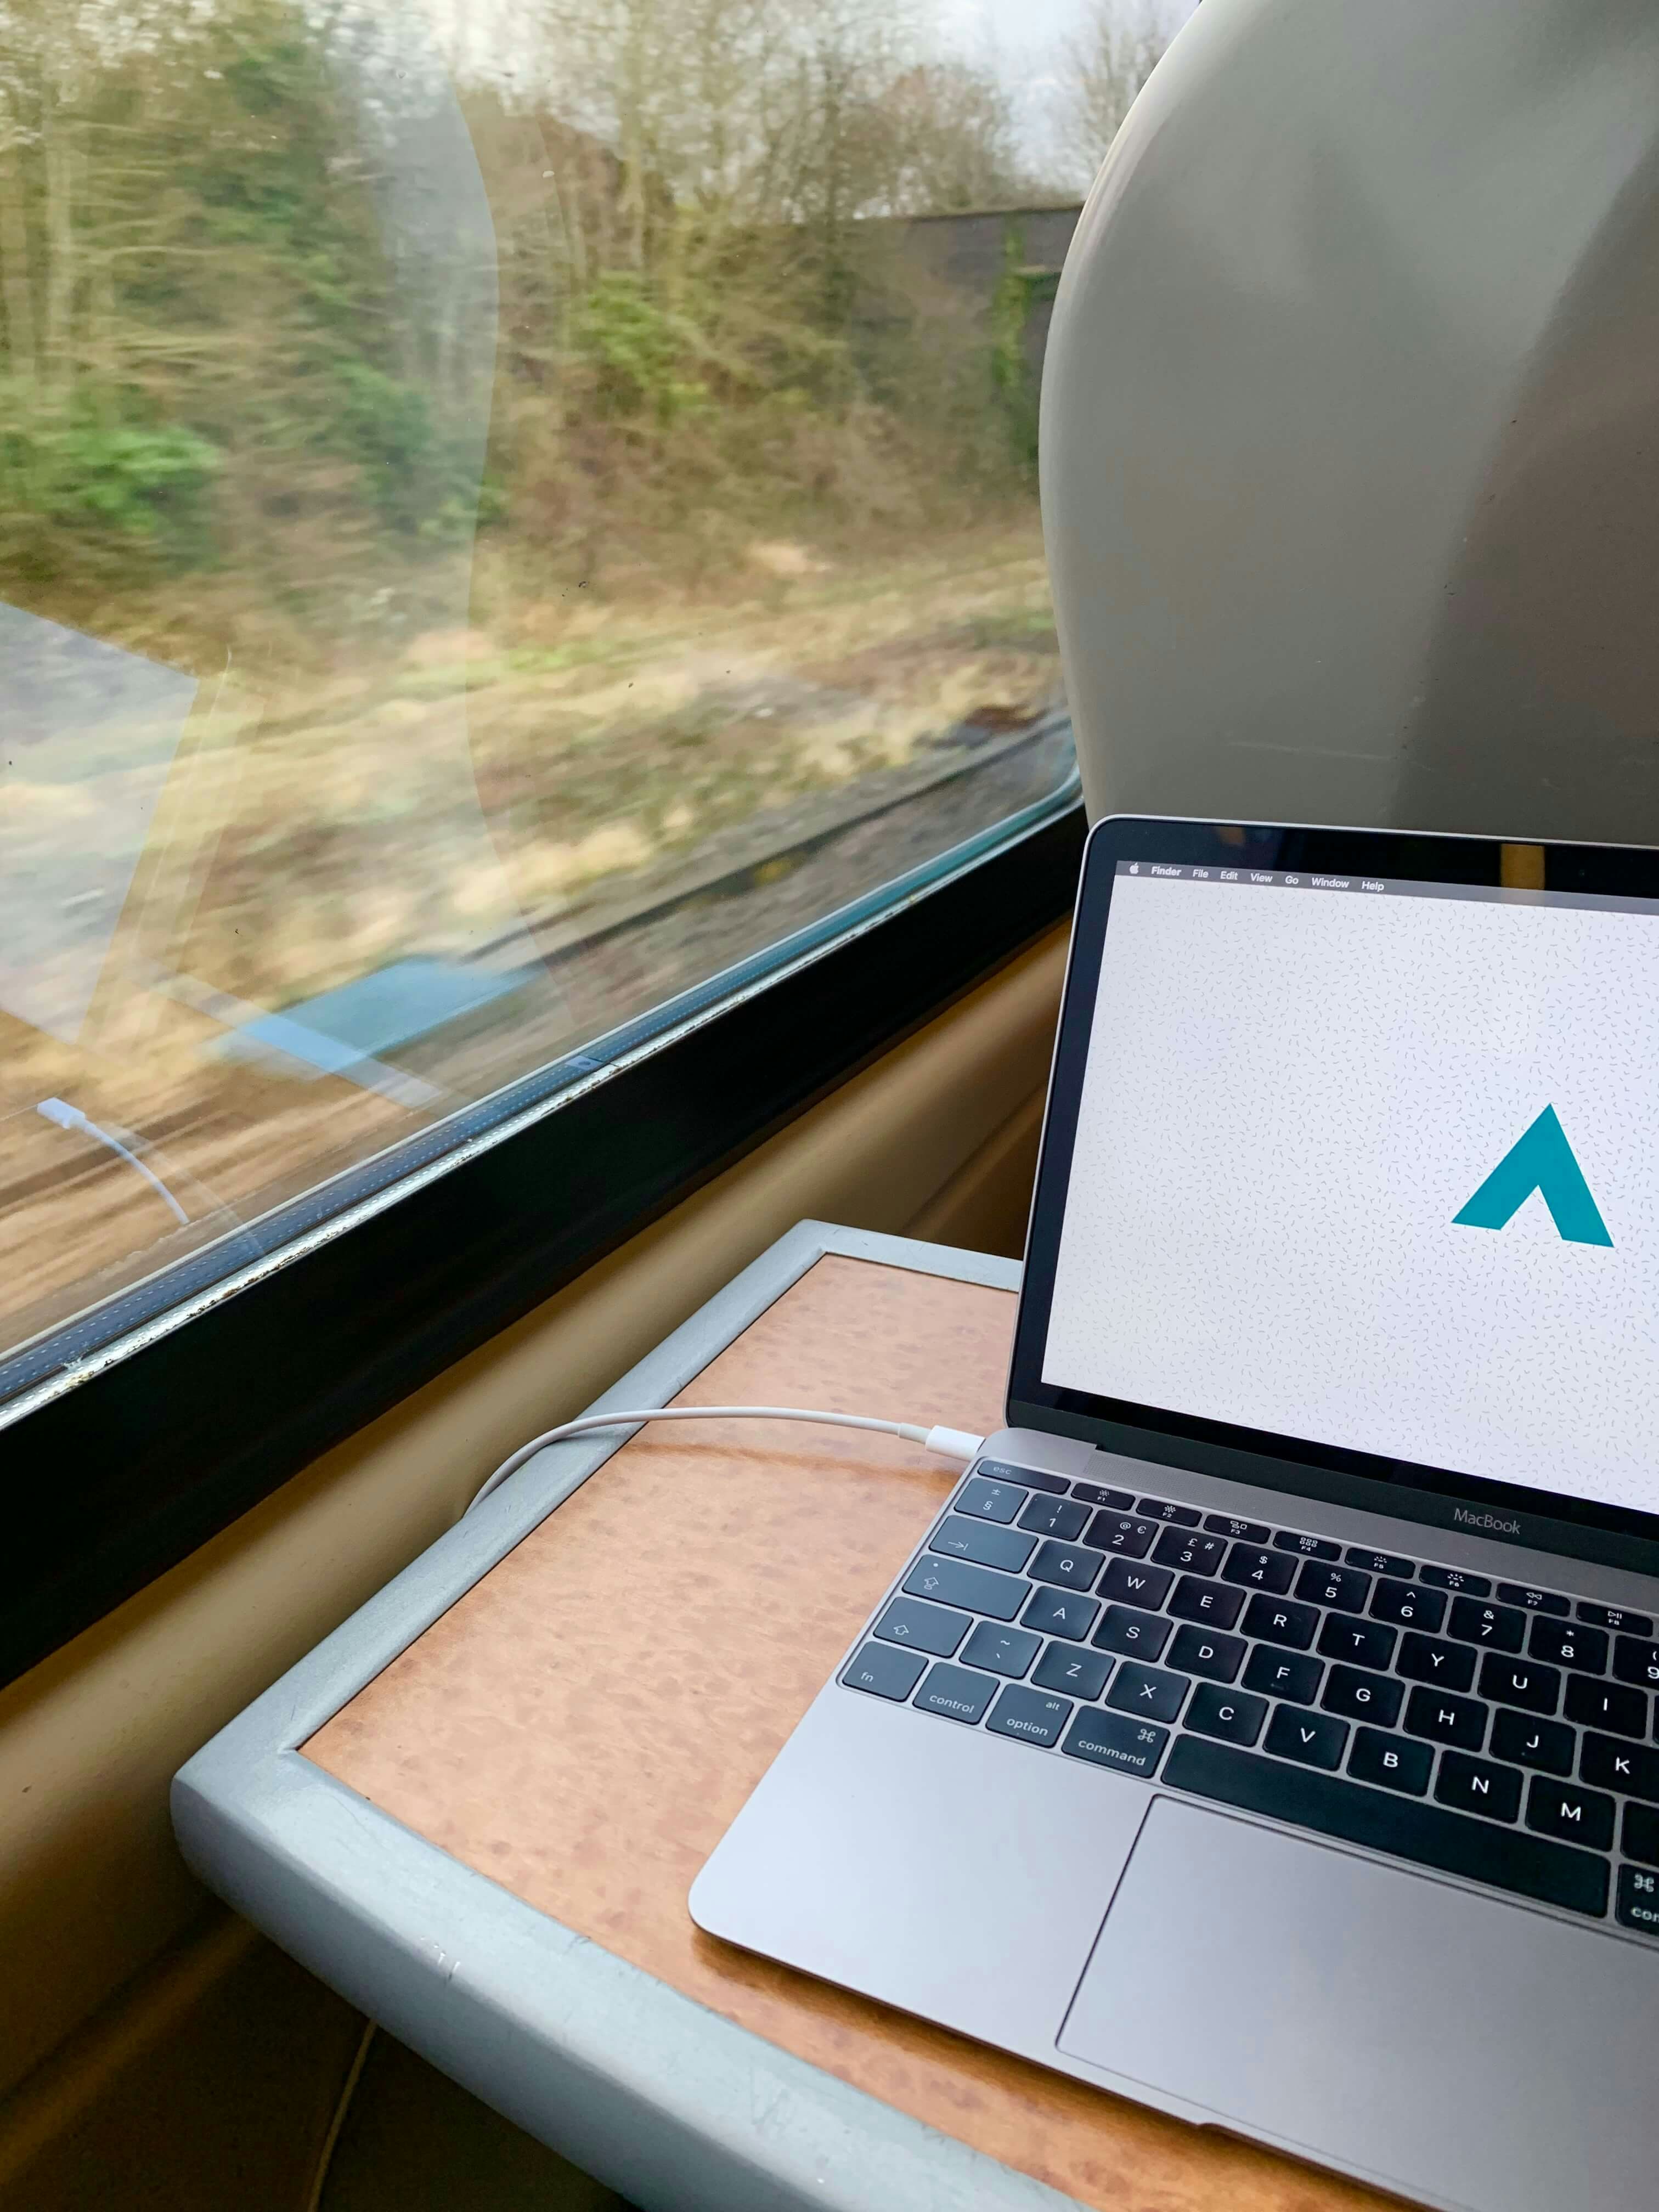 A laptop on a table inside a train